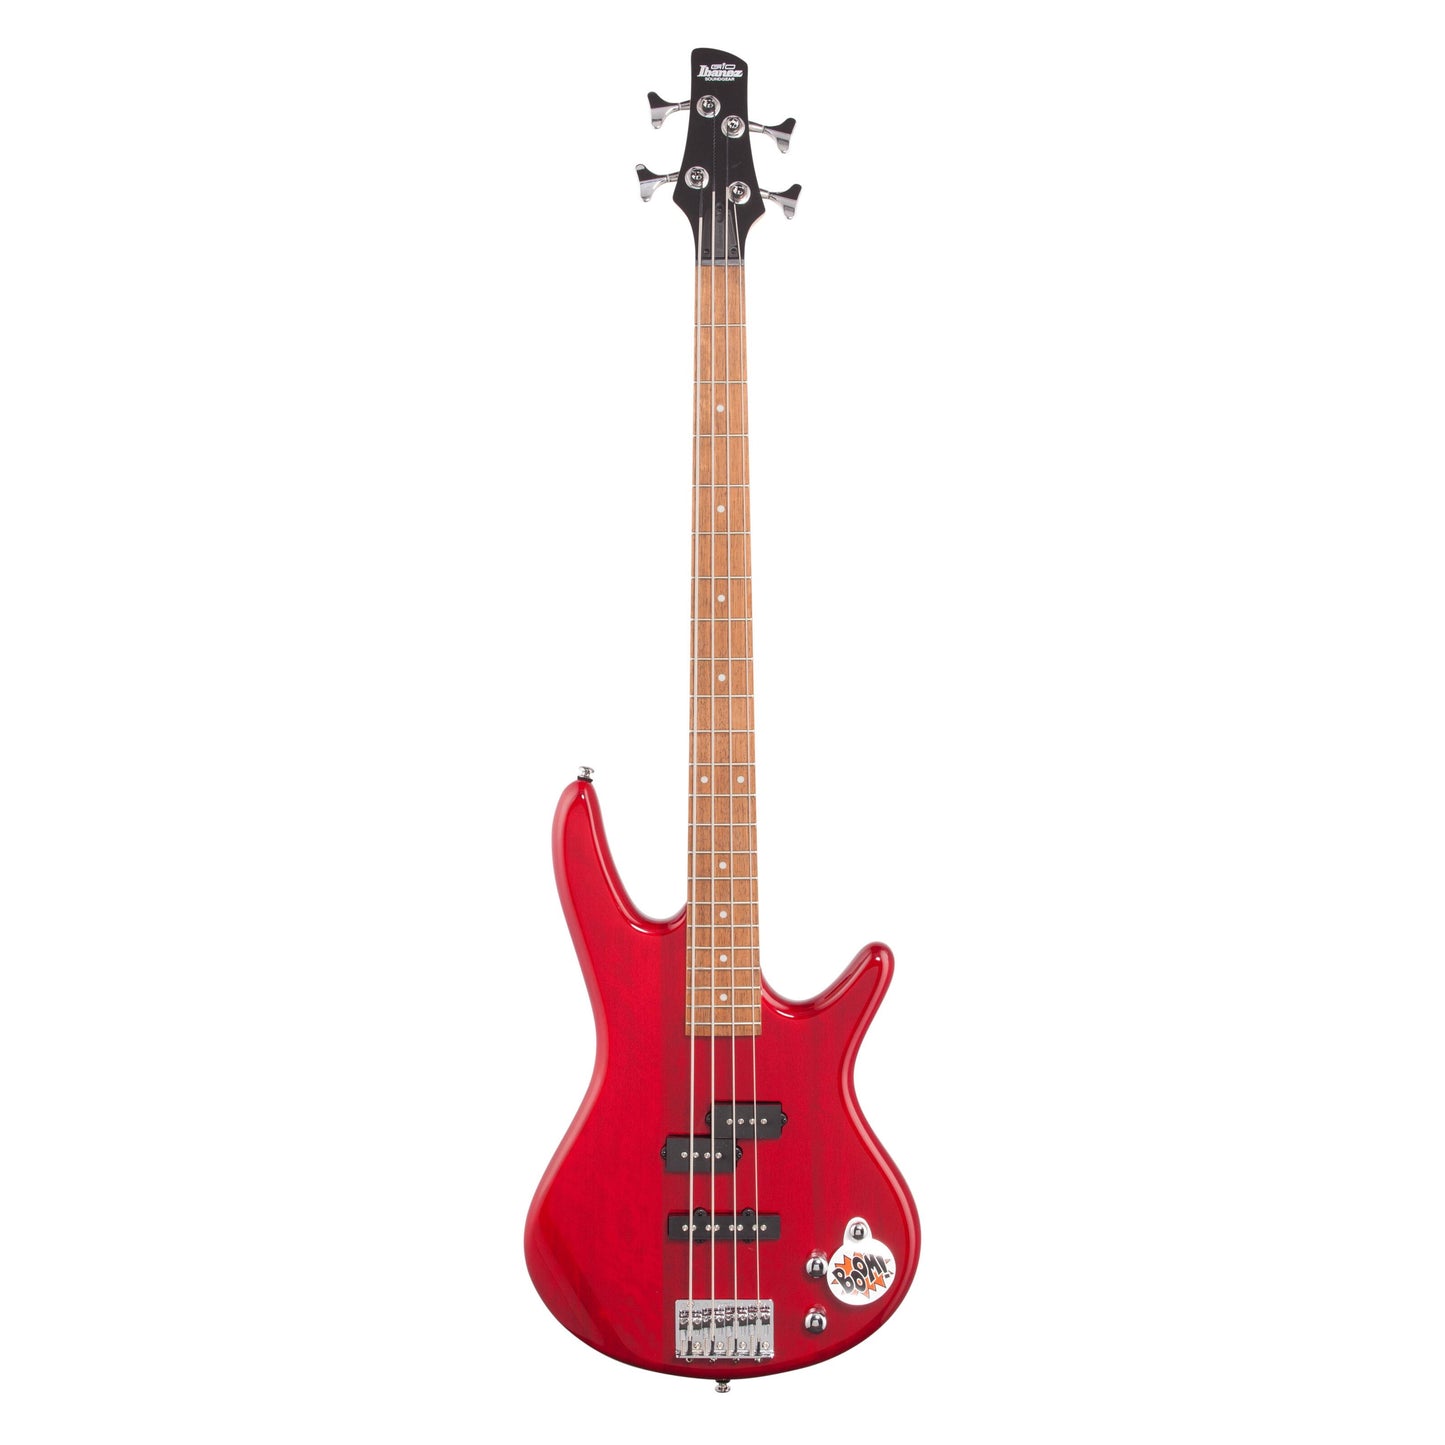 Ibanez GSR200 Electric Bass, Transparent Red